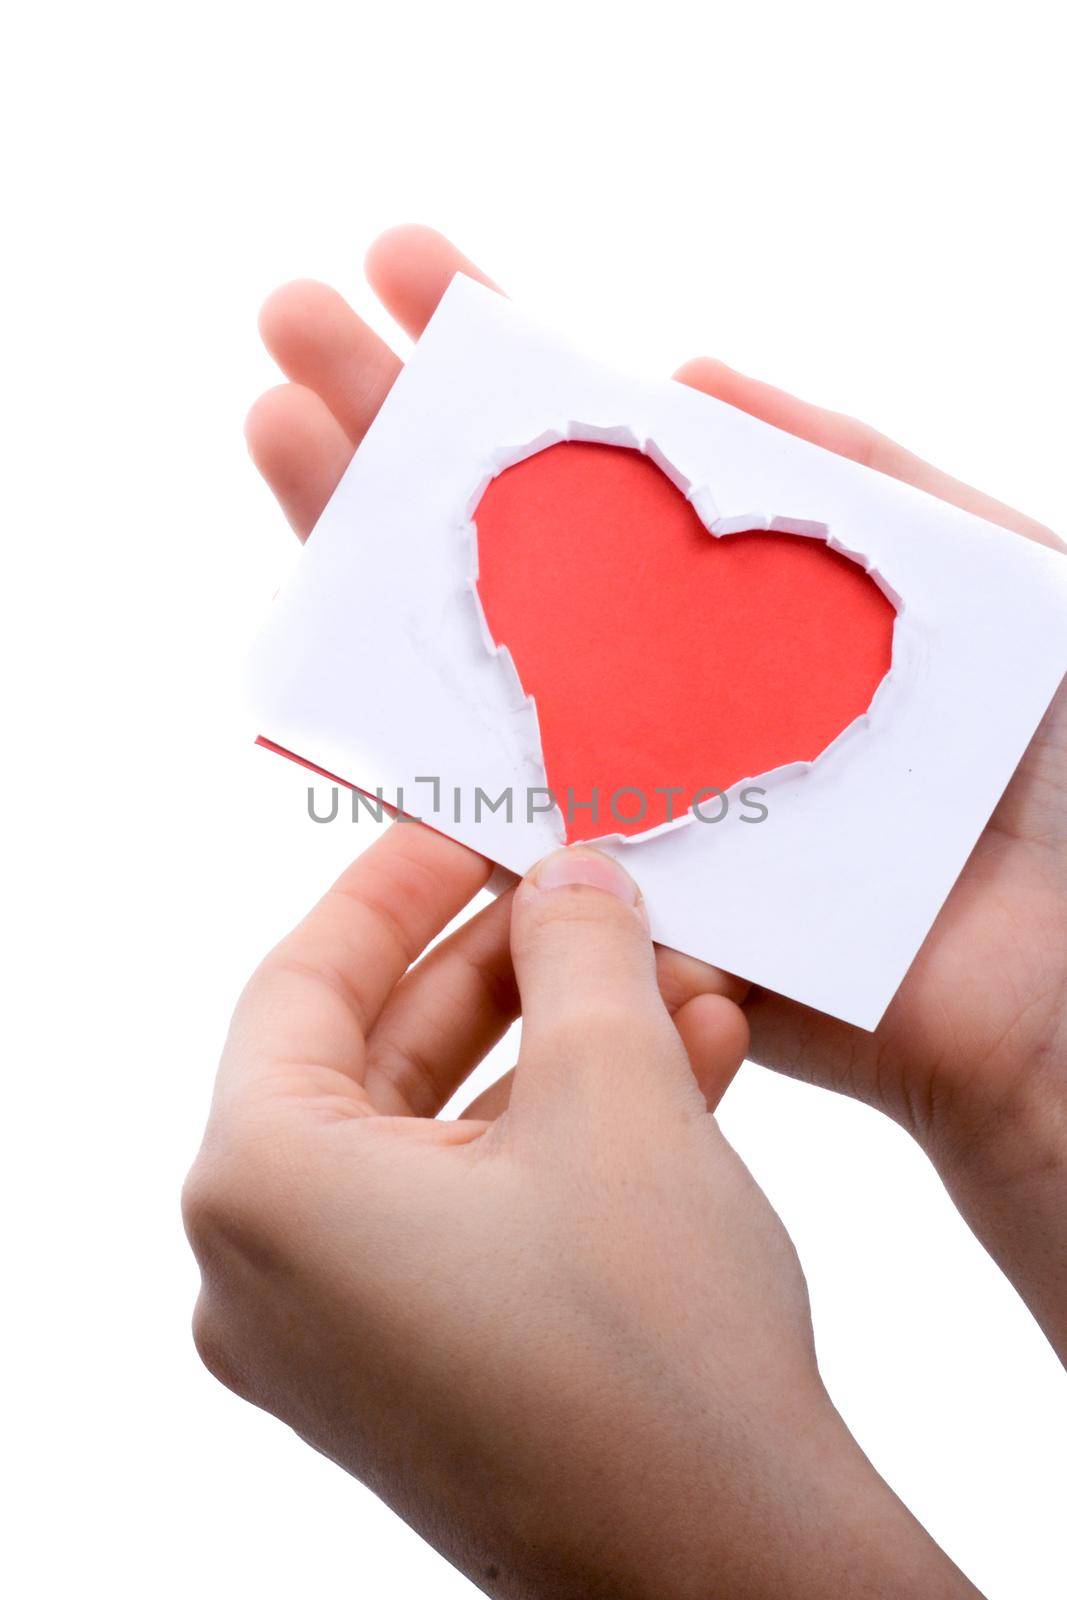 Hand holding a red heart shape paper cut out of paper on a white background